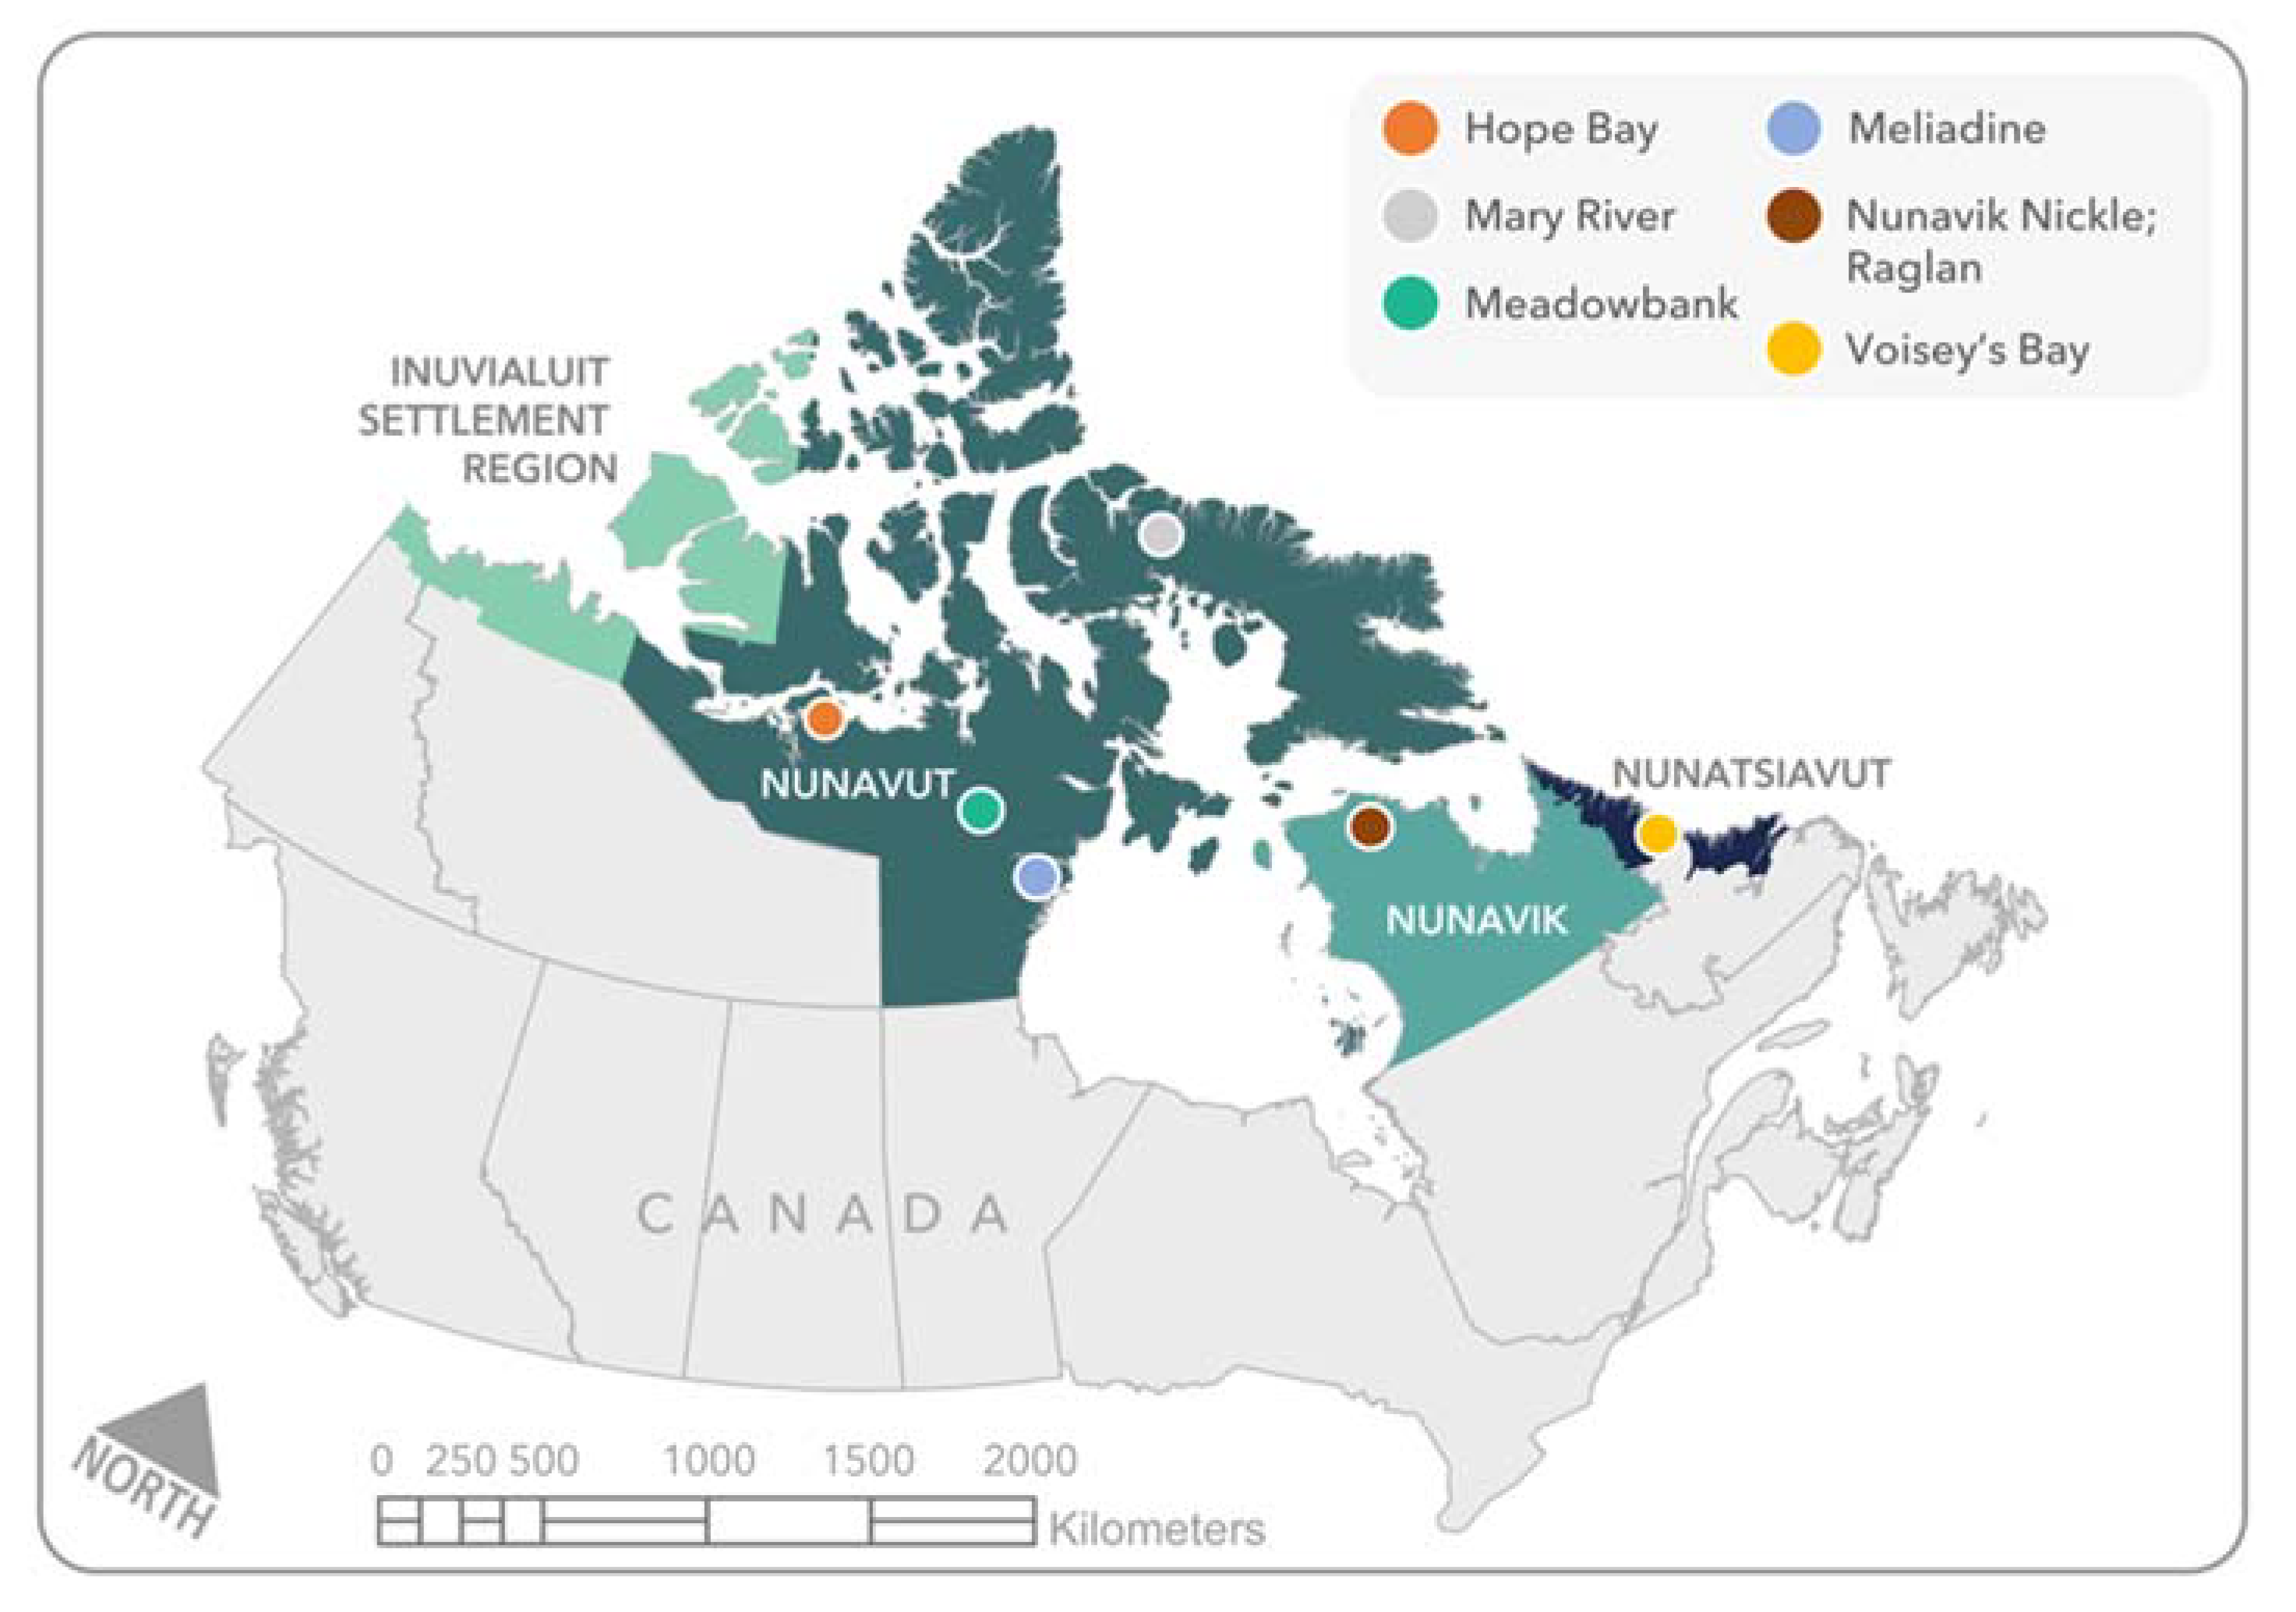 IJERPH Free Full-Text How Did the Media Report the Mining Industrys Initial Response to COVID-19 in Inuit Nunangat? A Newspaper Review